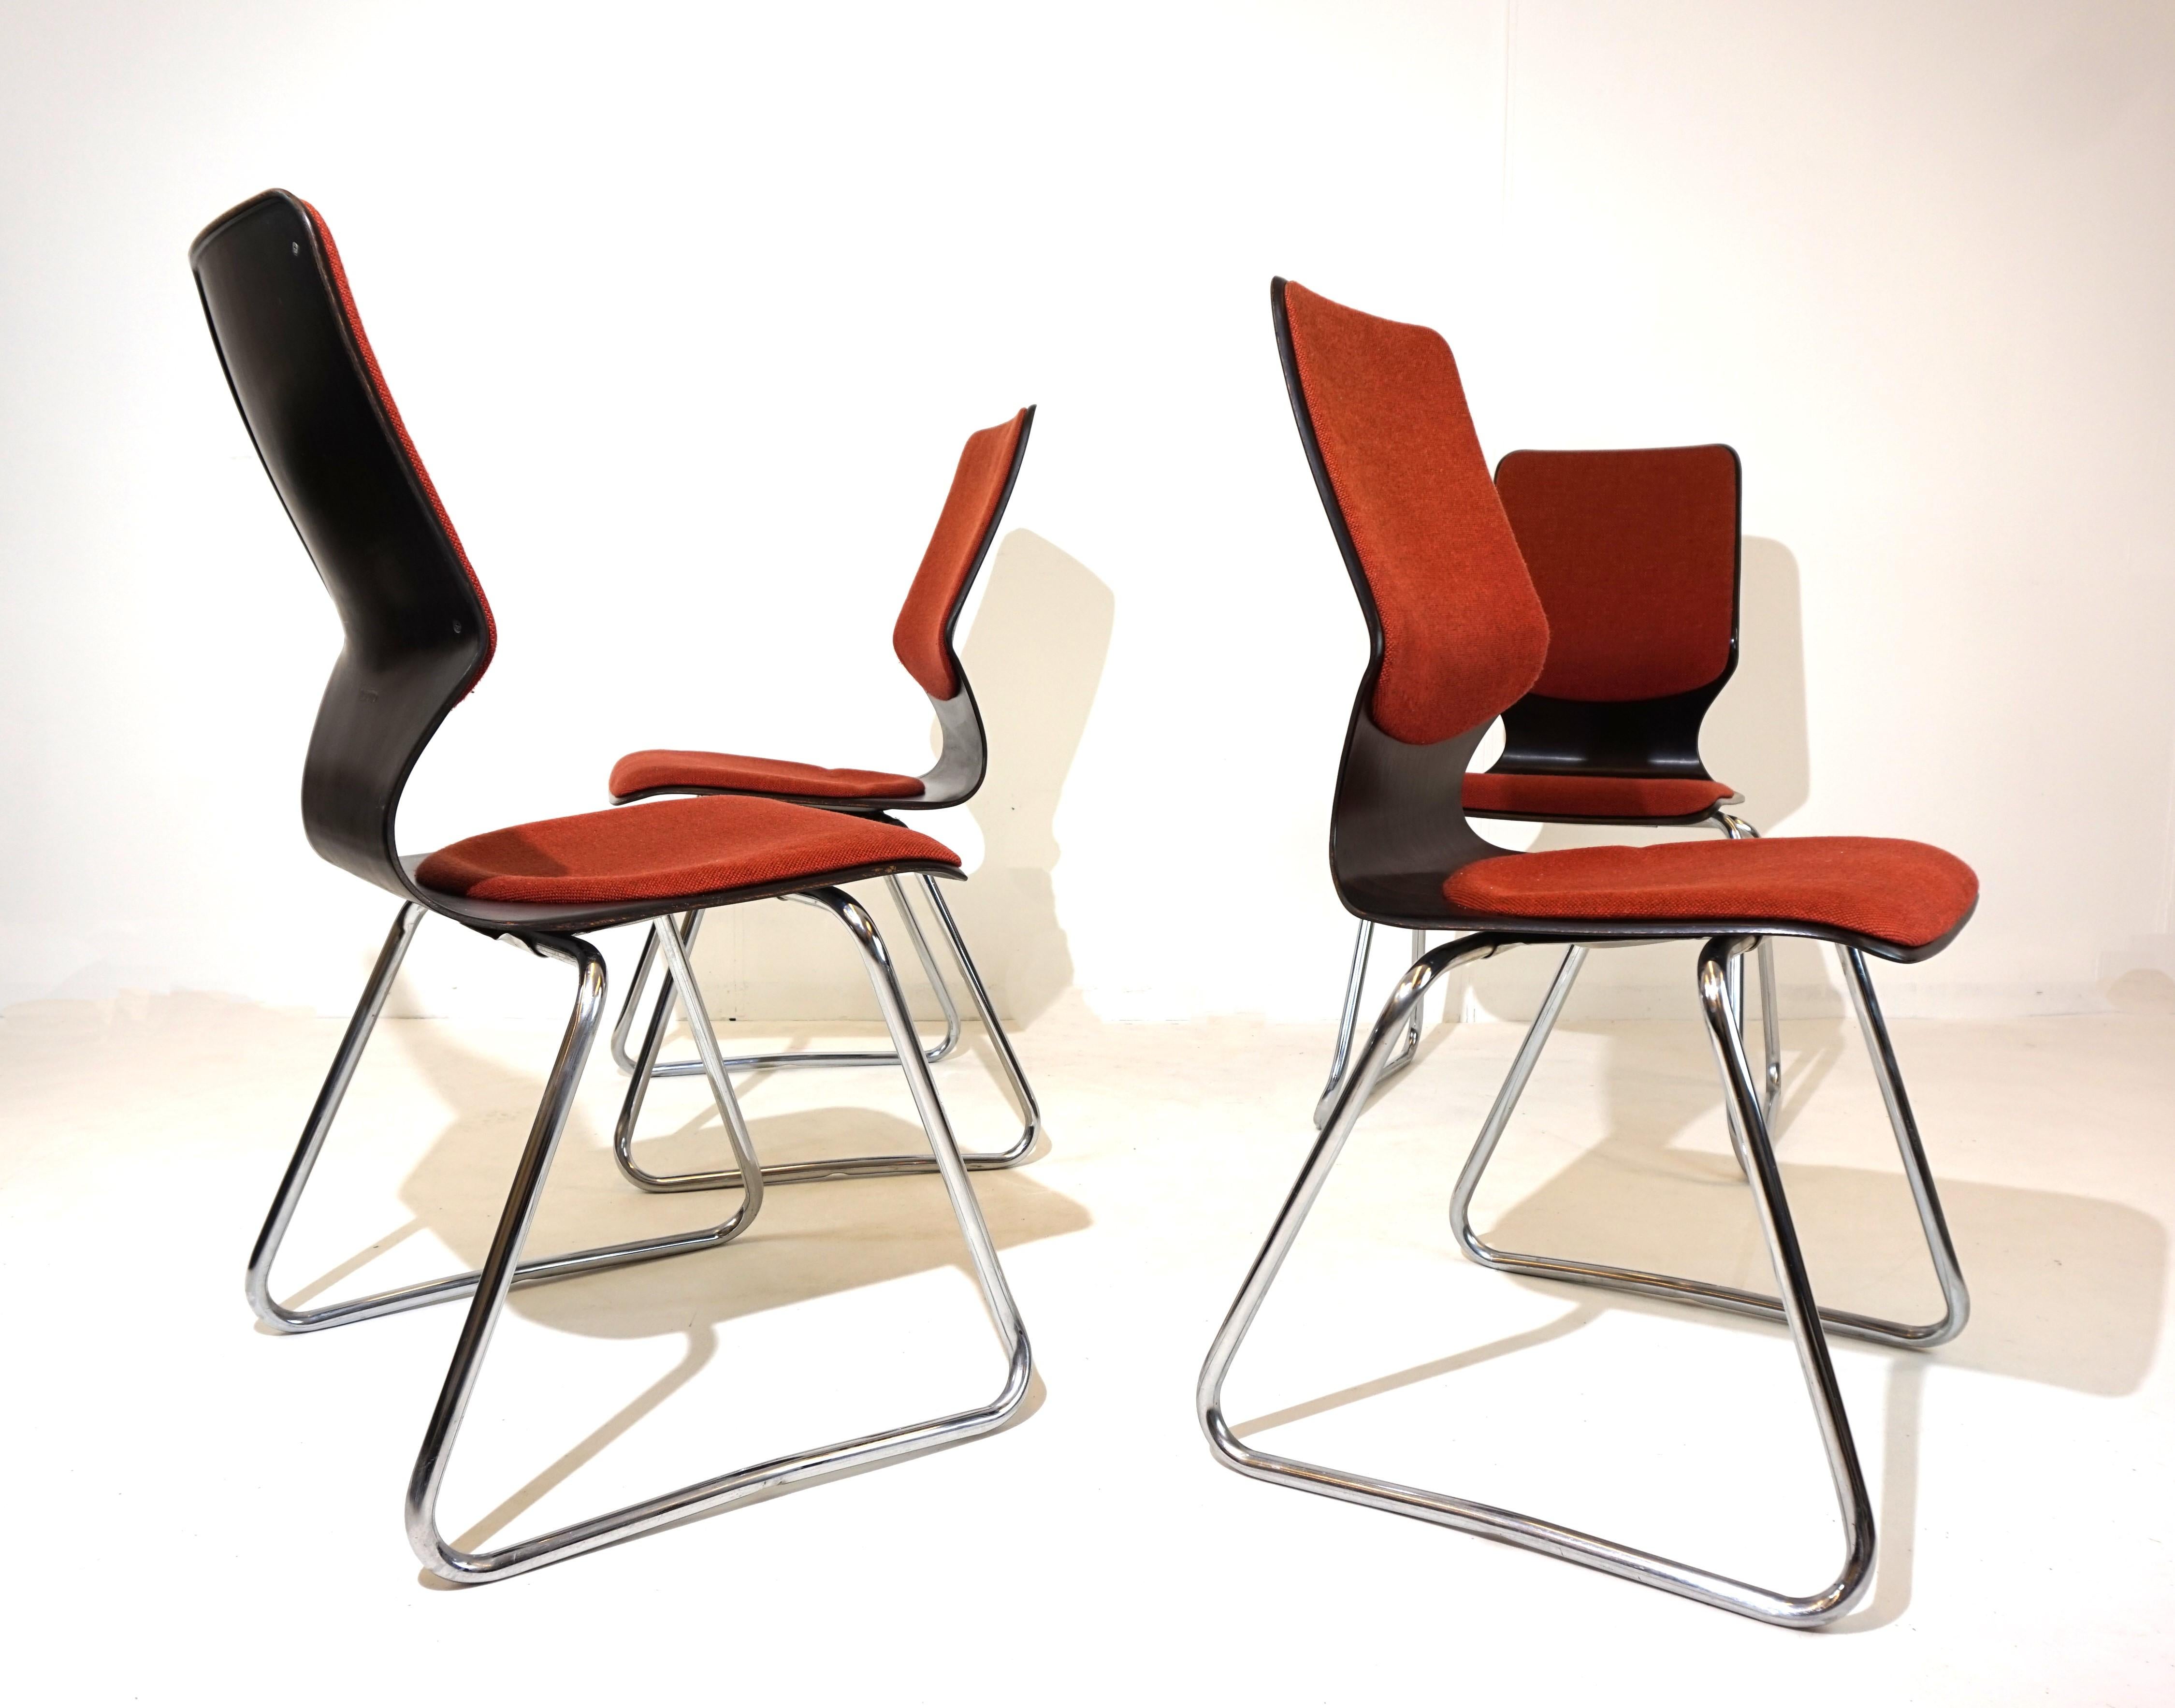 Flötotto set of 4 Pagholz chairs by Elmar Flötotto In Good Condition For Sale In Ludwigslust, DE